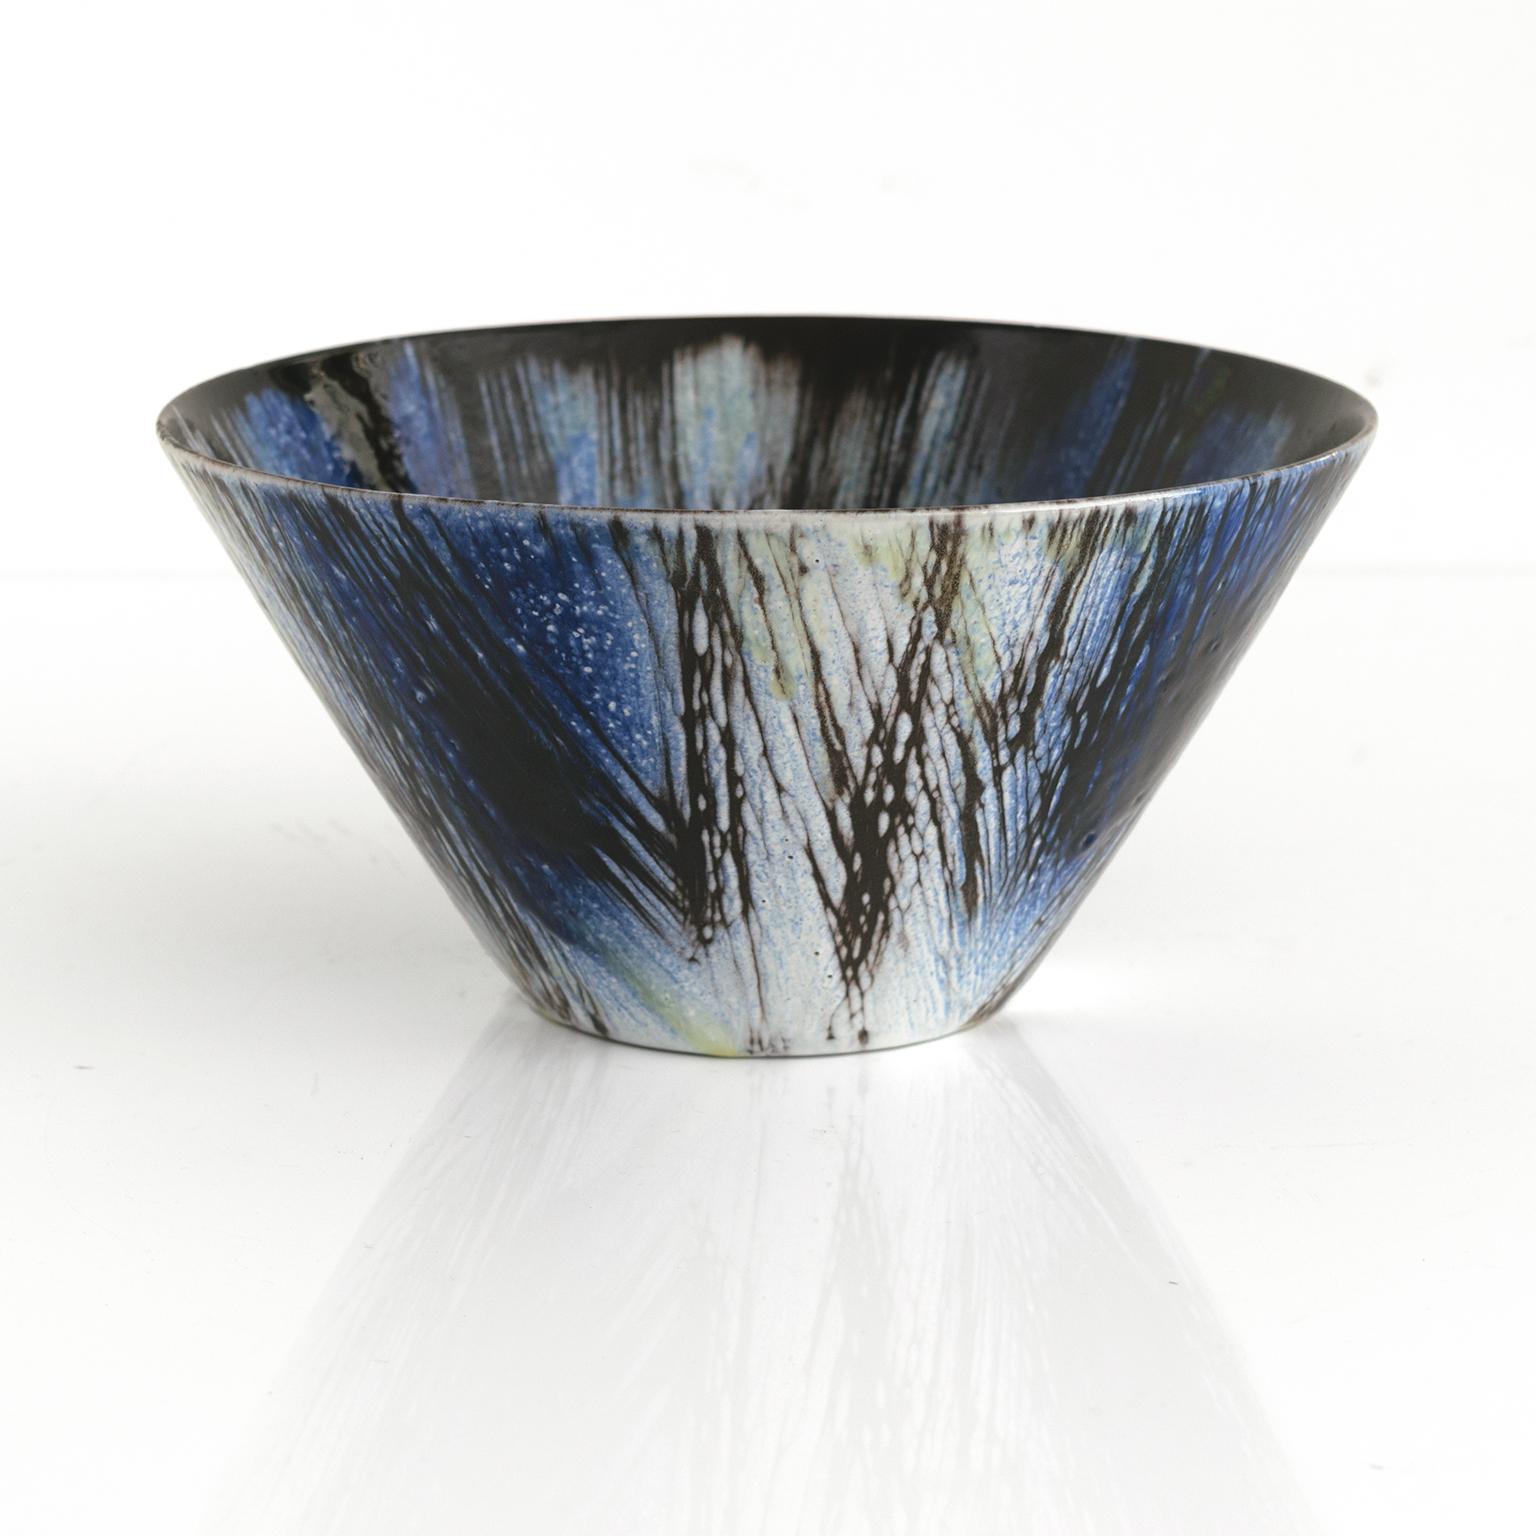 A Mari Simmulsson “cross-hatched” glazed bowl in blue, black and touches of yellow, for Upsala Ekeby, Sweden, circa 1950’s. Scandinavian Modern.

Measures: Diameter: 9“ Height: 4.5”.